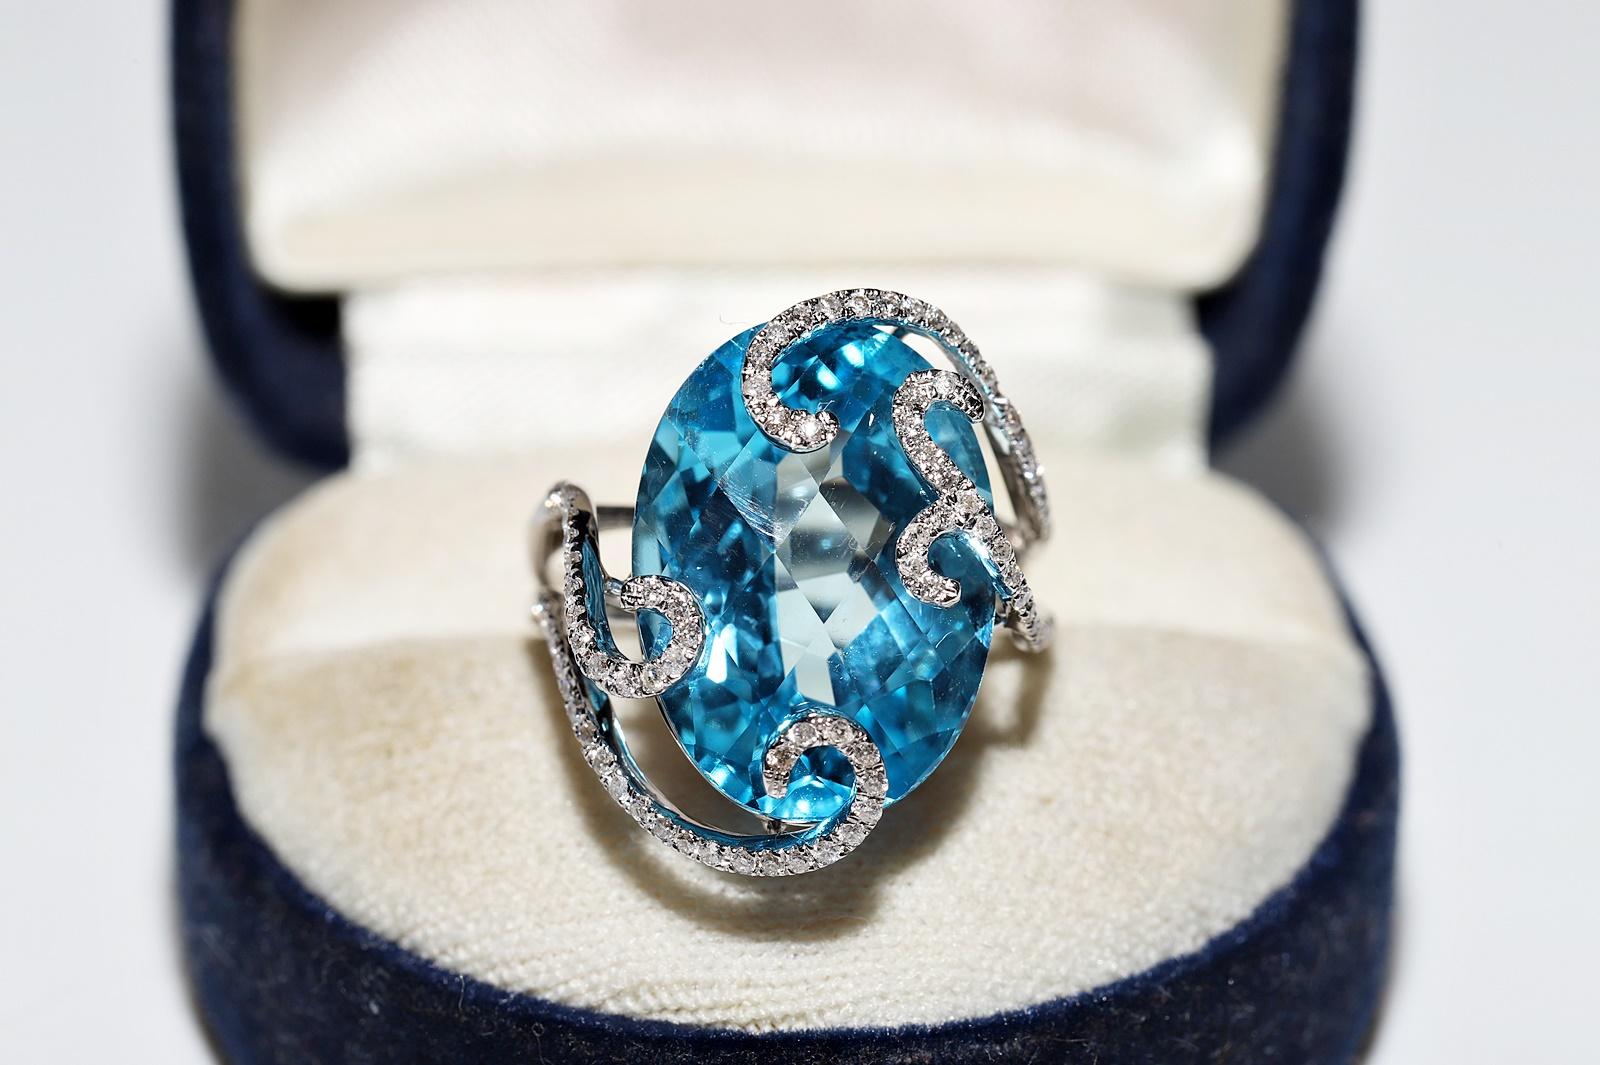 In very good condition.
Total weight is 8 grams.
Totally is diamond 0.45 ct.
The Diamond is has H color and vs-s1-s2 clarity.
Totally is blue topaz about 7 ct.
Ring size is US 6 (We offer free resizing)
We can make any size.
Box is not